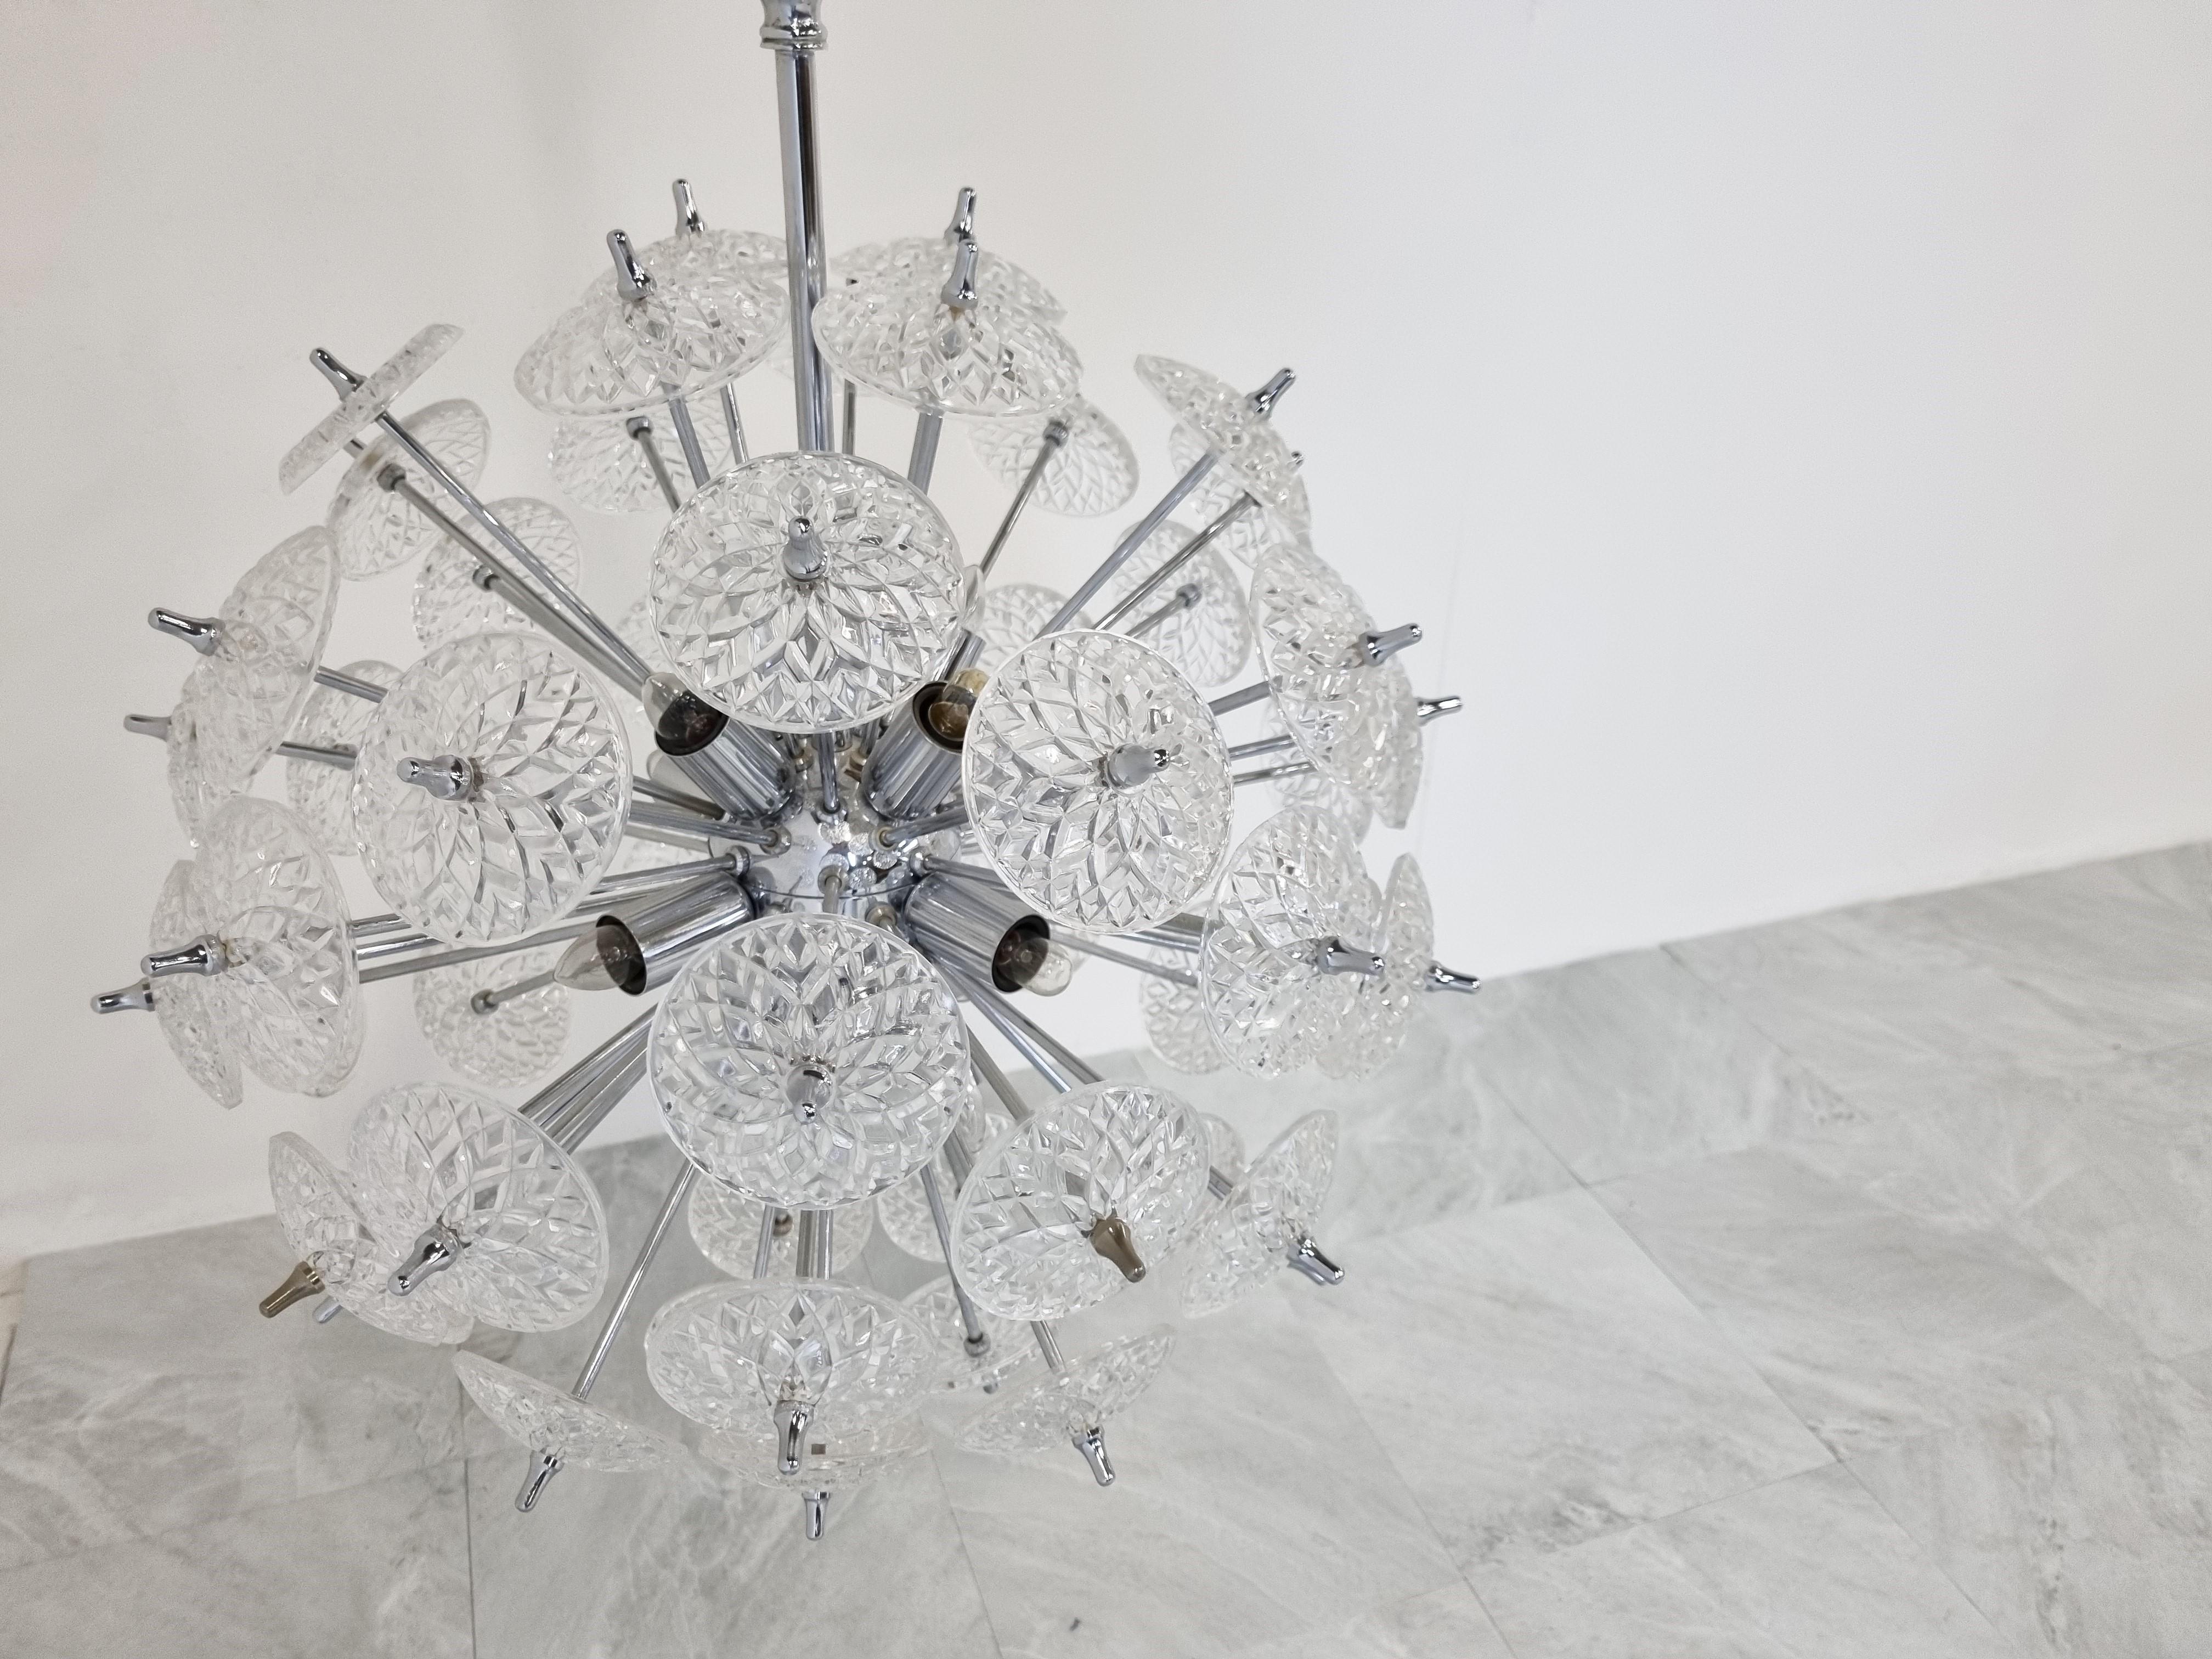 Impressive chrome and crystal sputnik chandelier.

The crystals are made by the renowned belgium glass company Val Saint Lambert.

The chandelier has 12 lightpoints that can be used with regular E14 candle light bulbs.

These chandeliers are